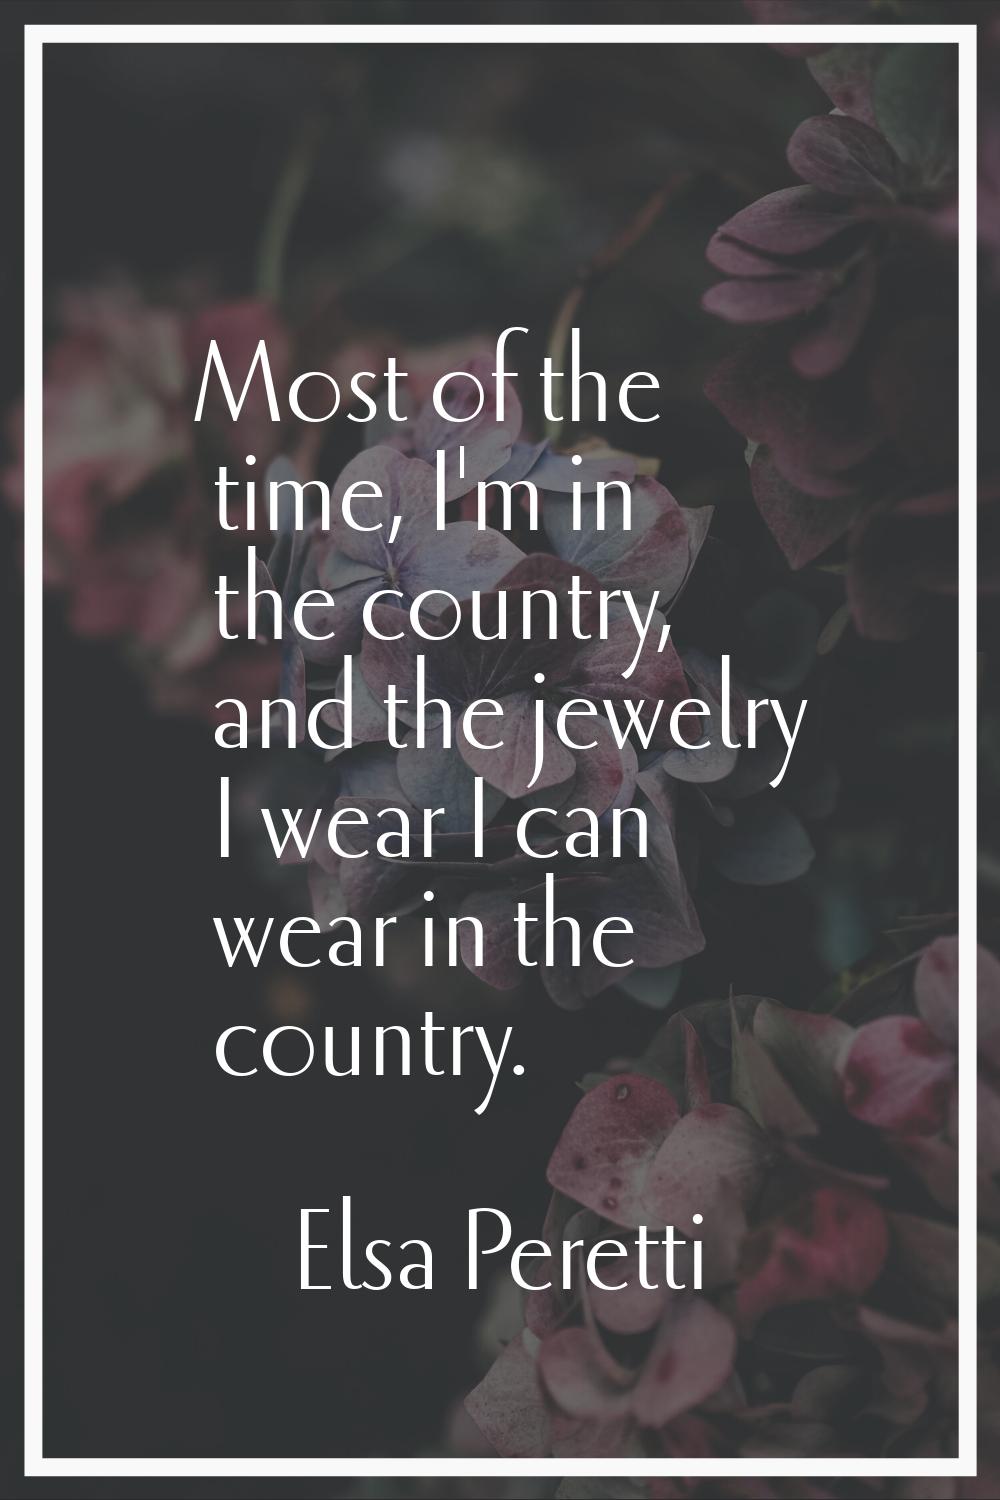 Most of the time, I'm in the country, and the jewelry I wear I can wear in the country.